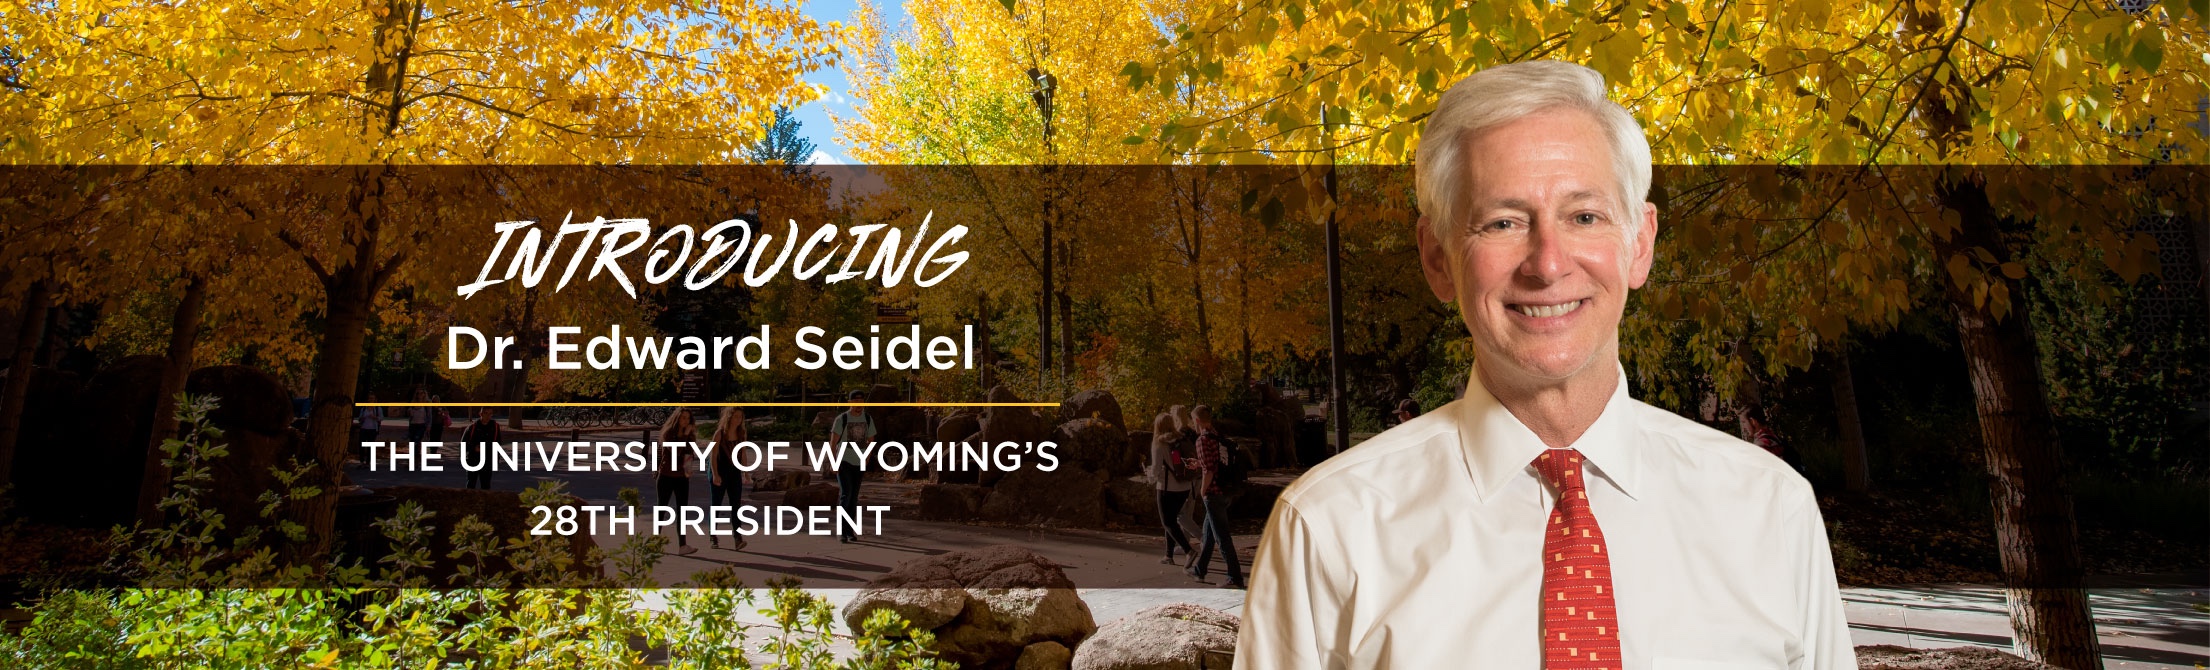 Introducing Dr. H. Edward Seidel. The University of Wyoming’s 28th President